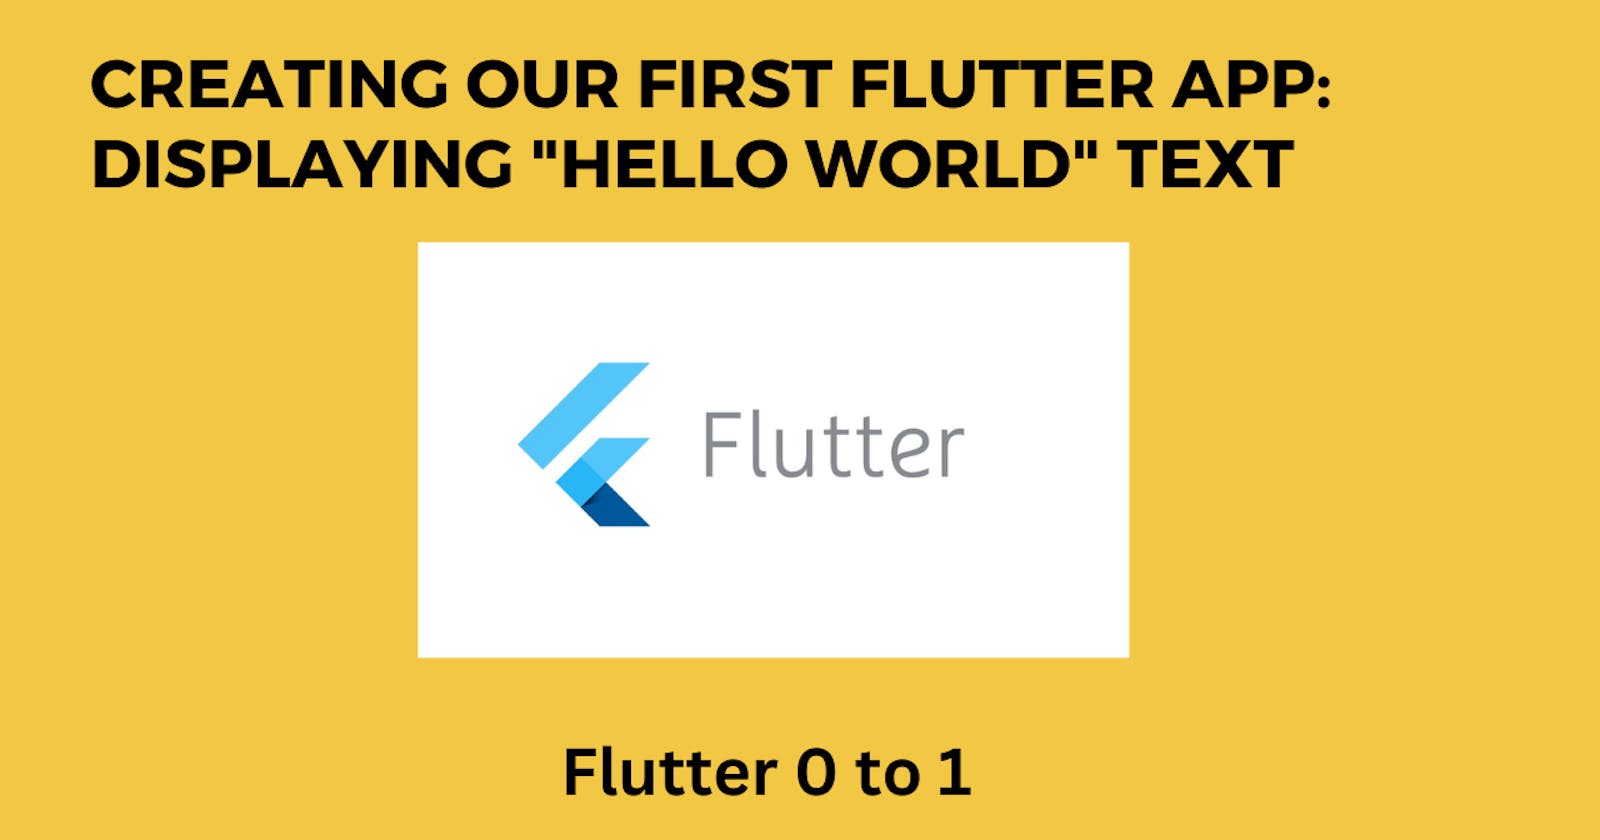 Creating Our First Flutter App: Displaying "Hello World" Text